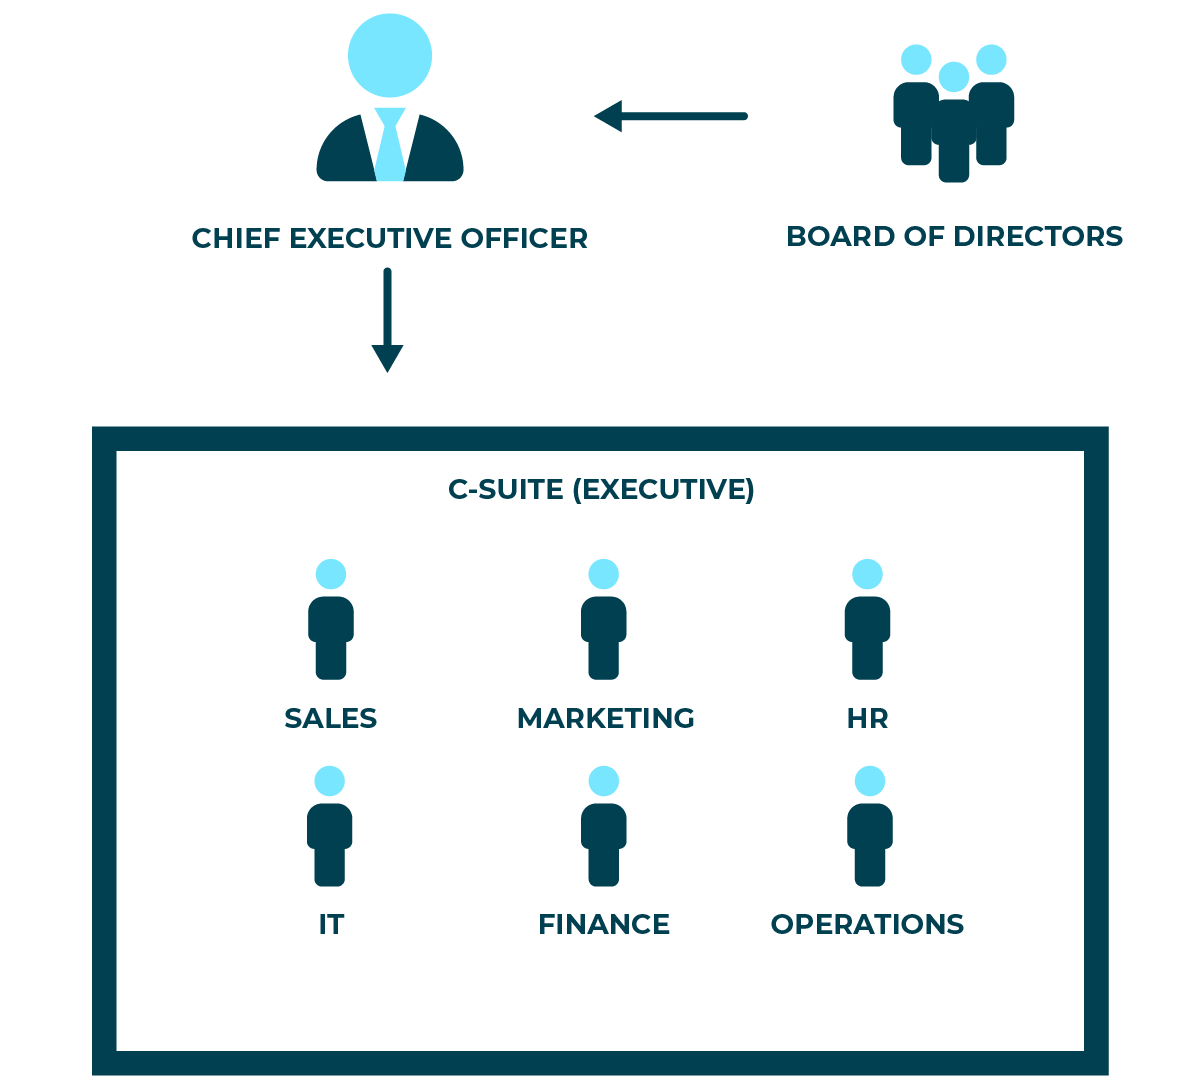 Diagram showing Chief Executive officer, the board of directors and the executive C-suite inc. Sales, Marketing and IT.